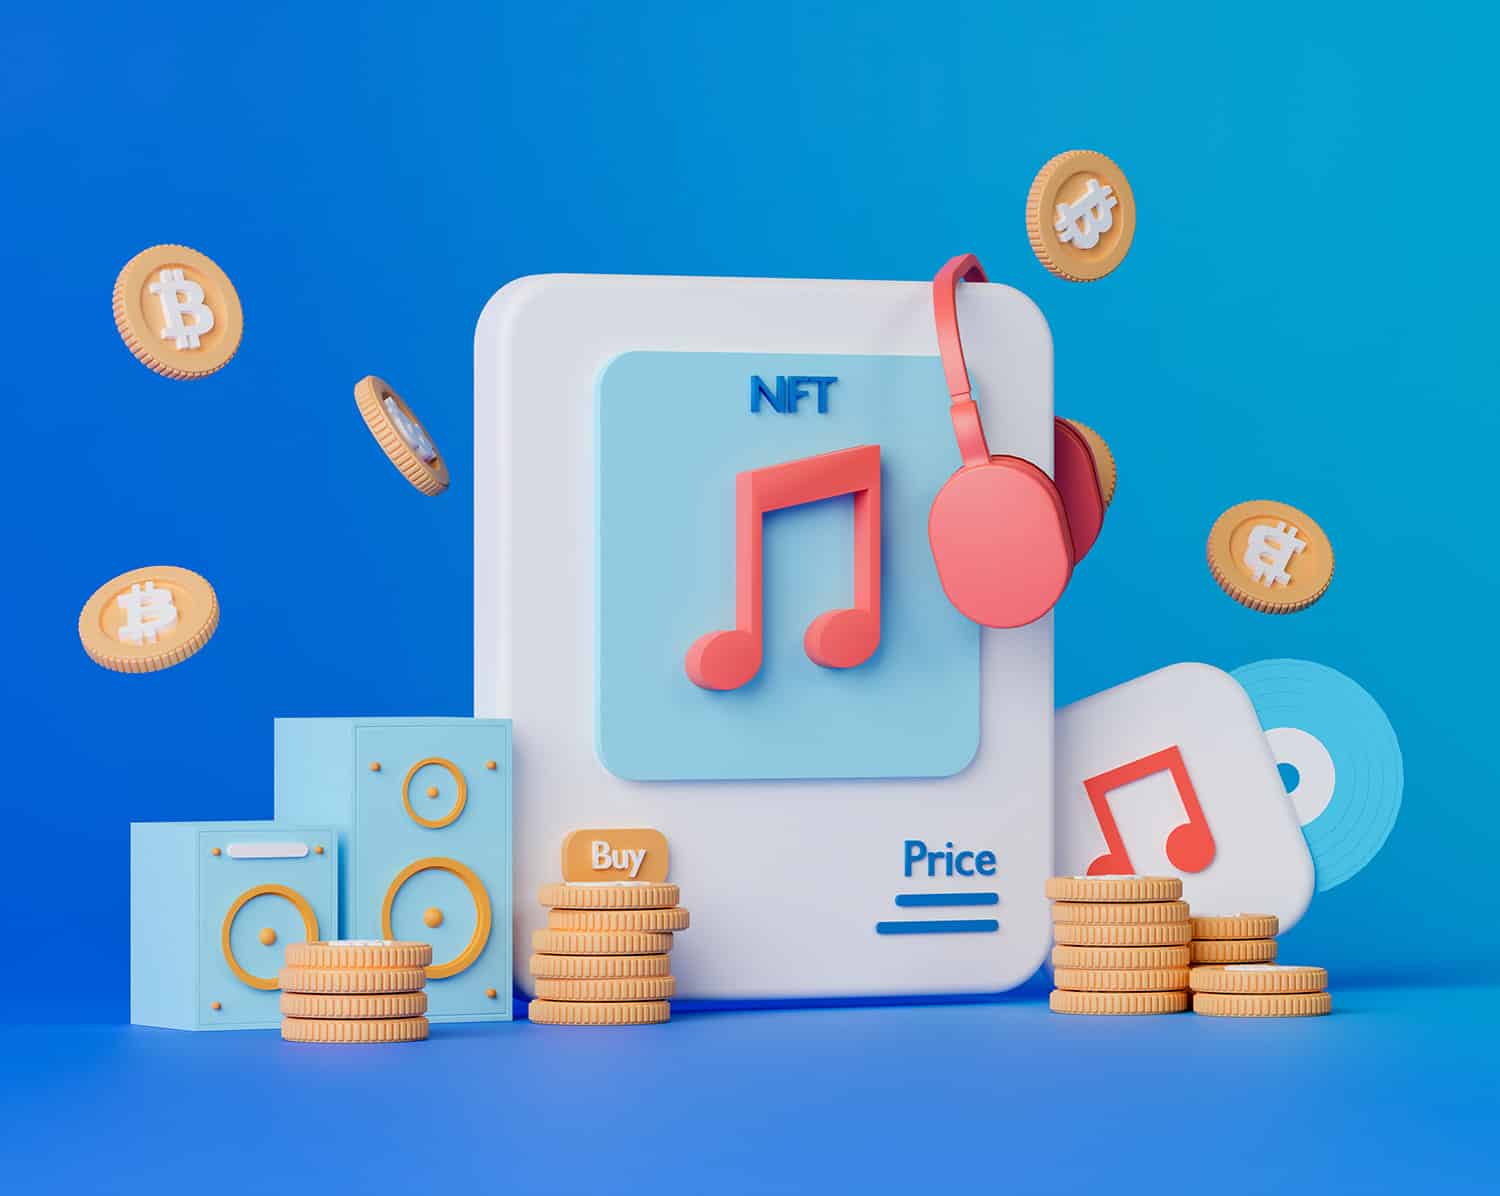 NFT’s allow people to listen to original content and buy tracks as non-fungible tokens.